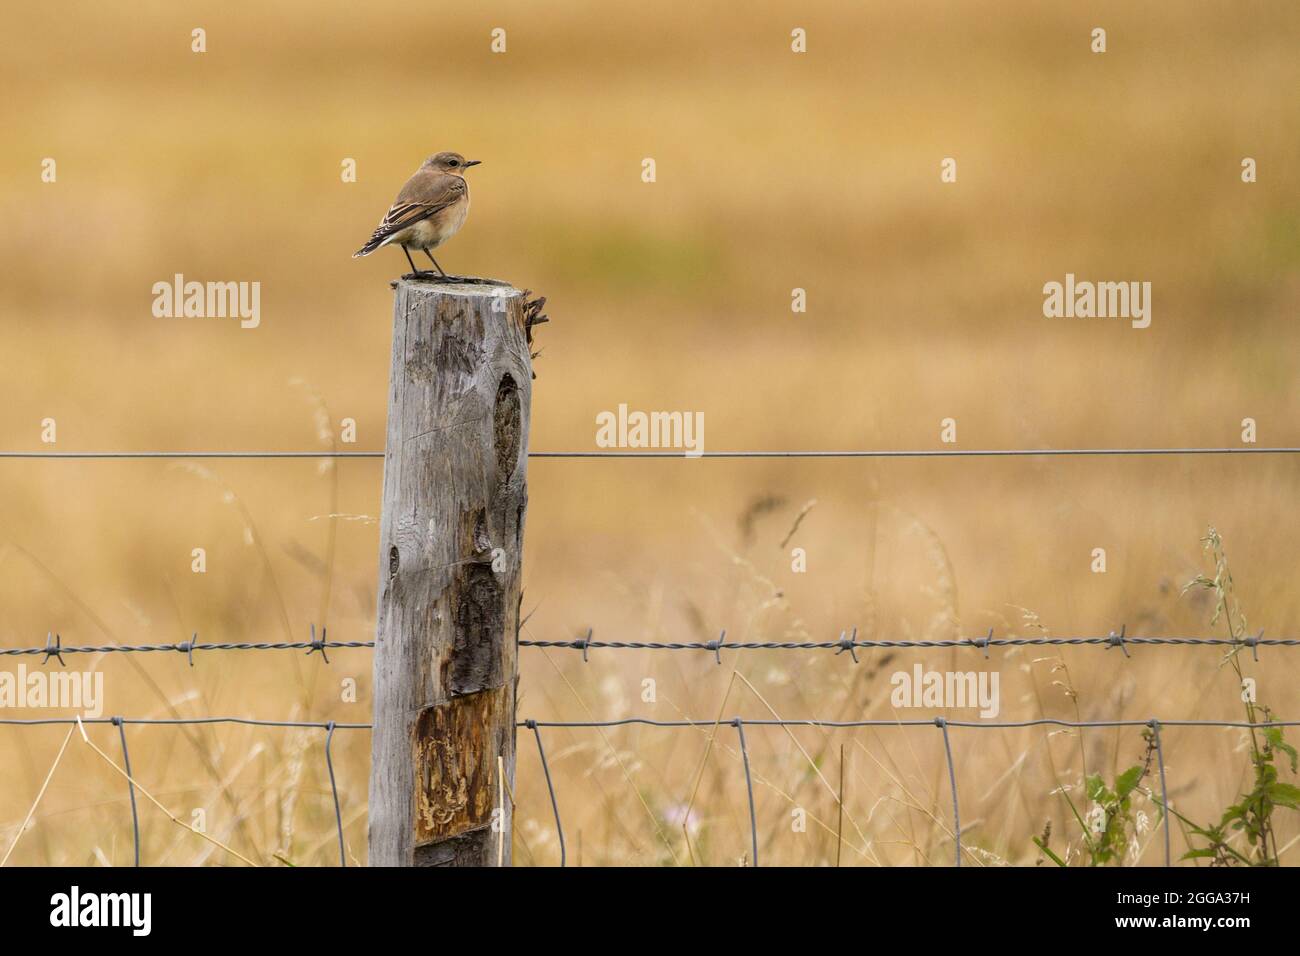 Wheatear (Oenanthe oenanthe) female bird in late summer plumage sandy brown dark tail and wing tips white rump perched on fence post look out for food Stock Photo